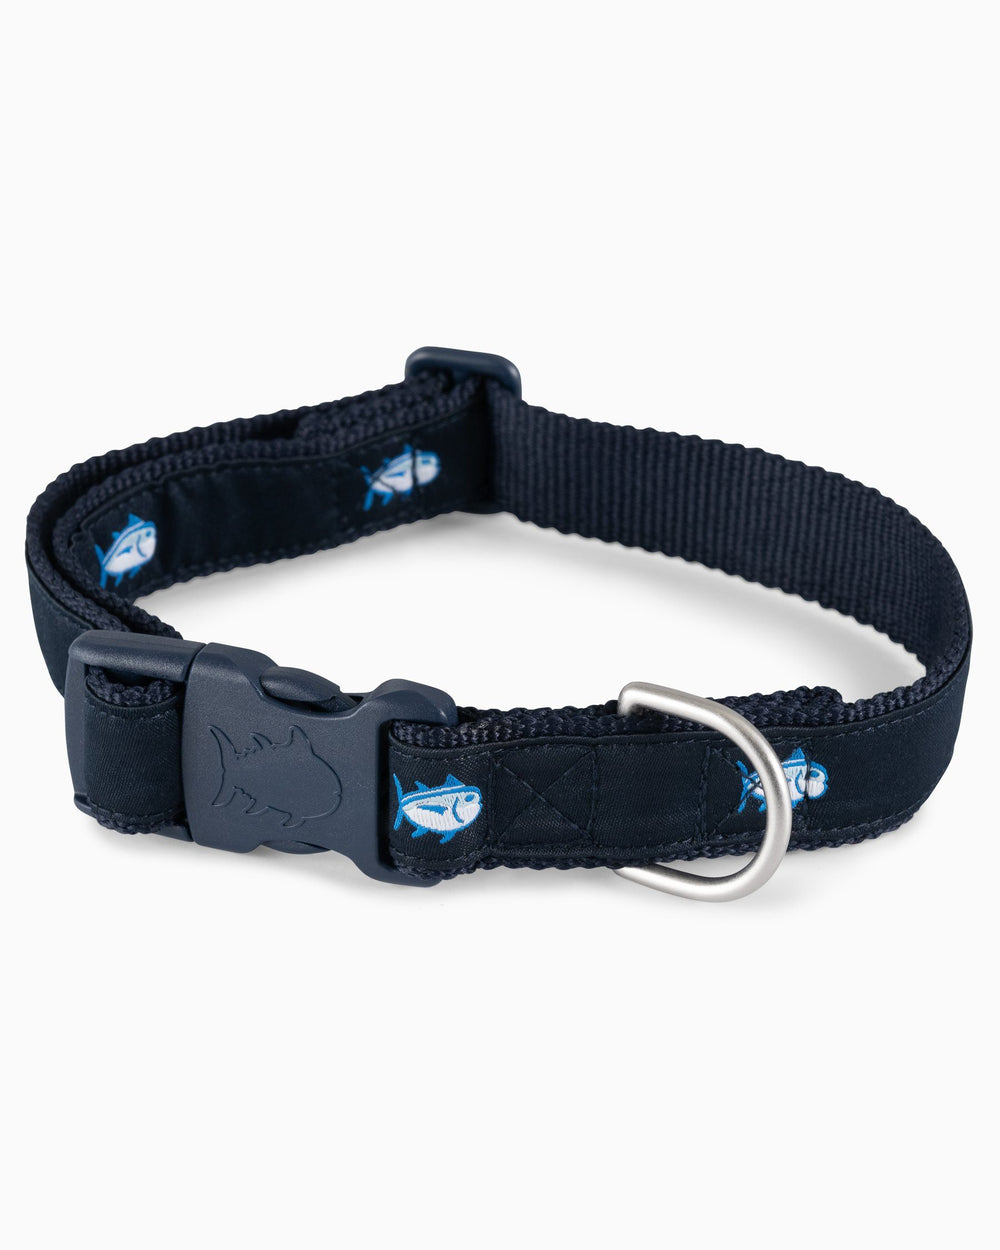 The detail of the Southern Tide Skipjack Dog Collar by Southern Tide - True Navy